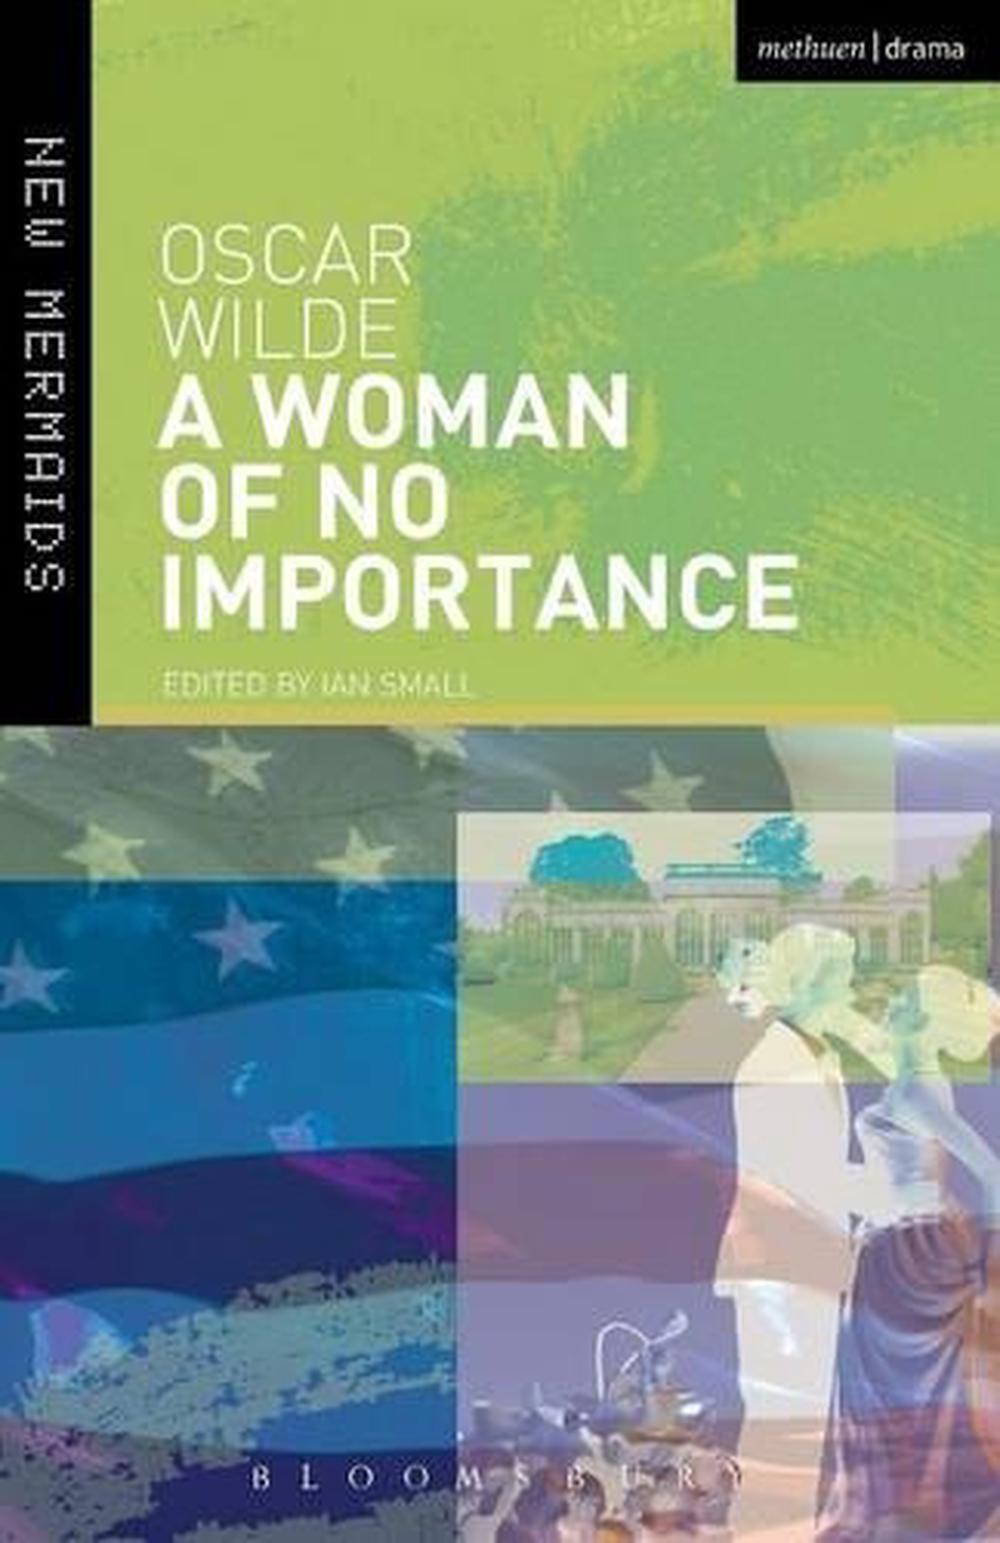 book a woman of no importance